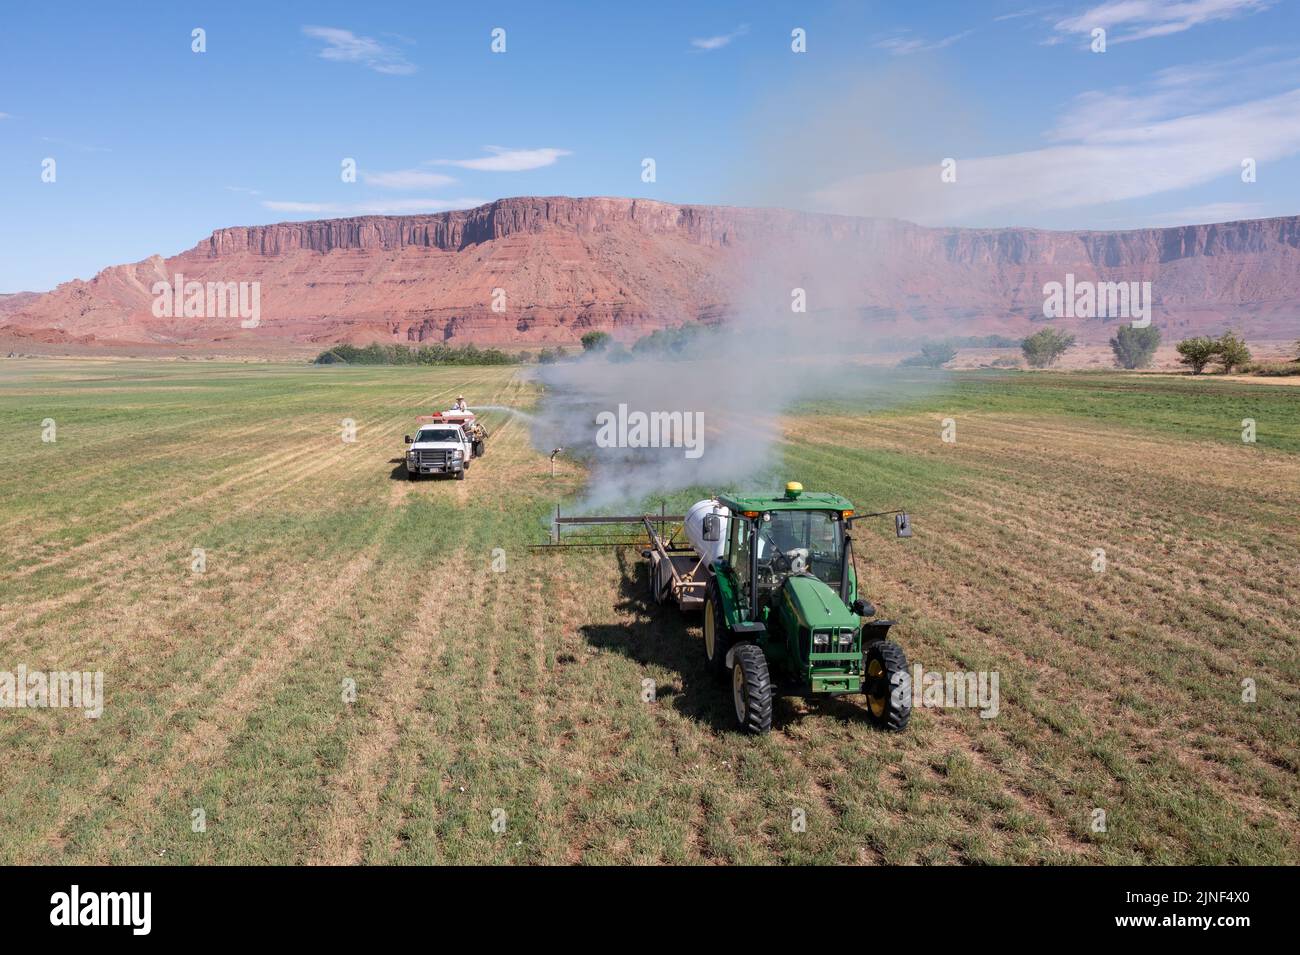 A tractor pulls a propane burner to burn weeds in an hay field after cutting the alfalfa on a ranch in Utah.  A water truck follows to control the fir Stock Photo